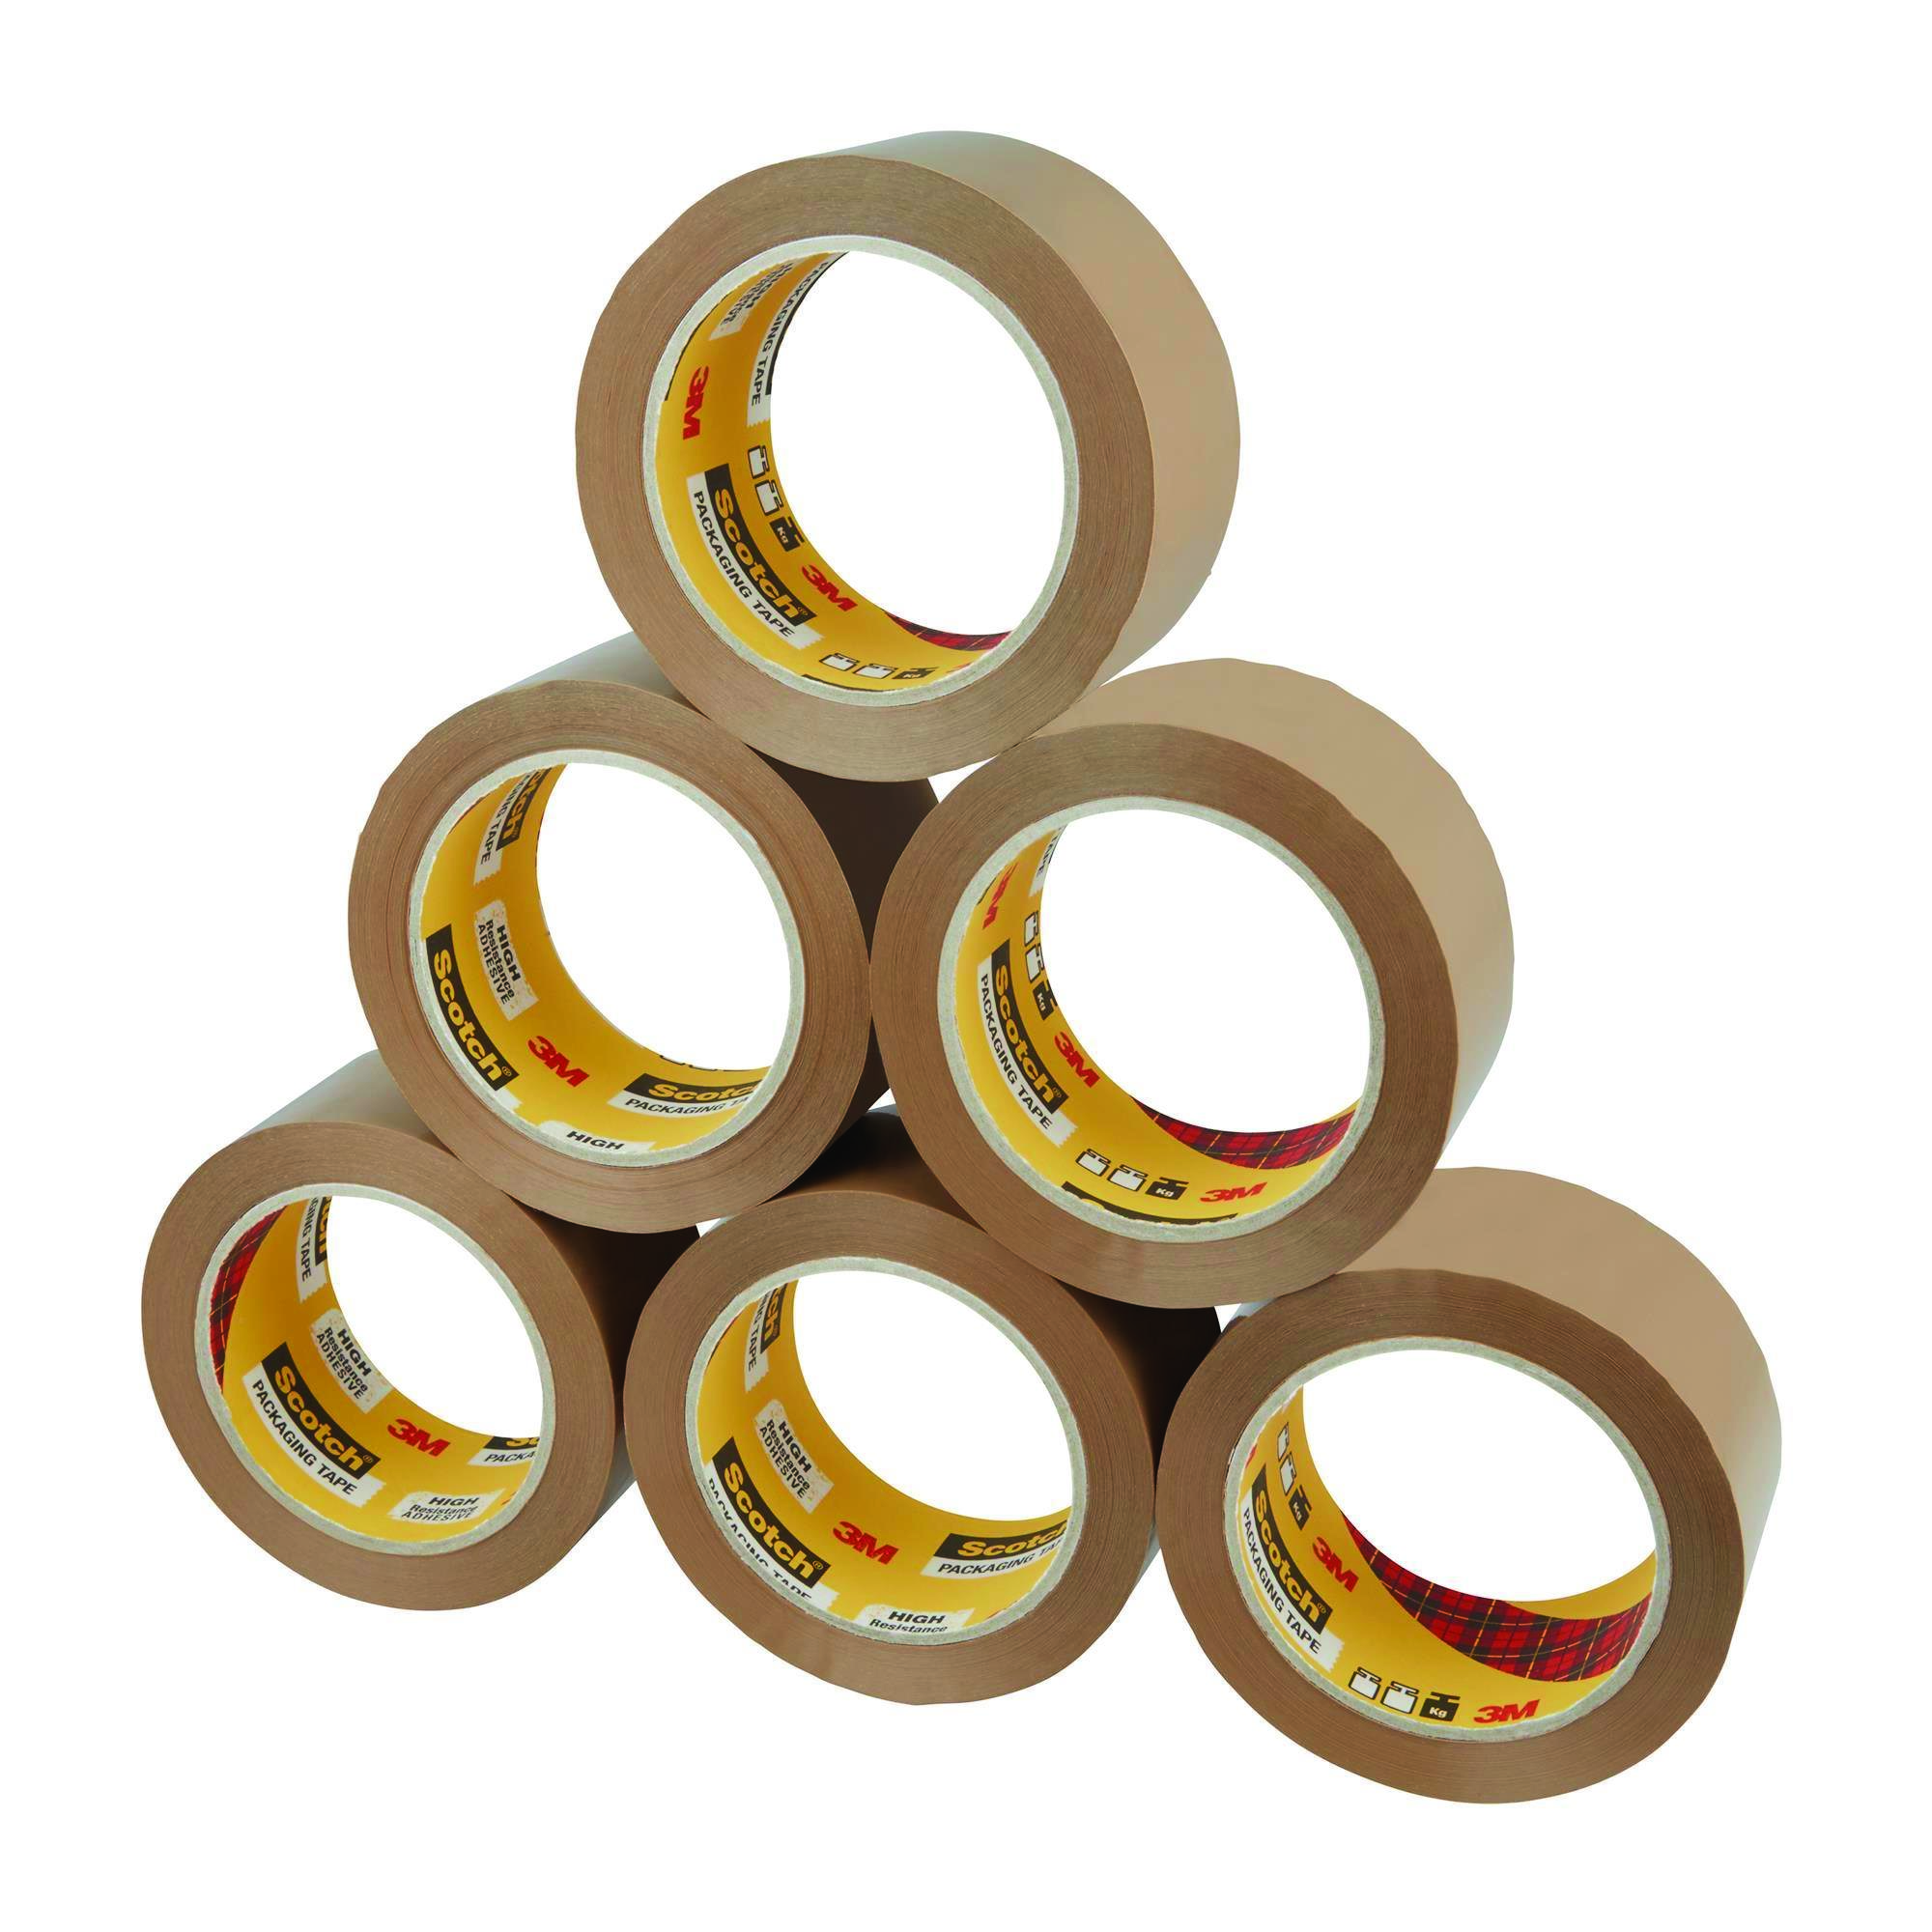 6 Rolls of Packing Packaging Tape 3M Scotch Strong Brown Buff 66m